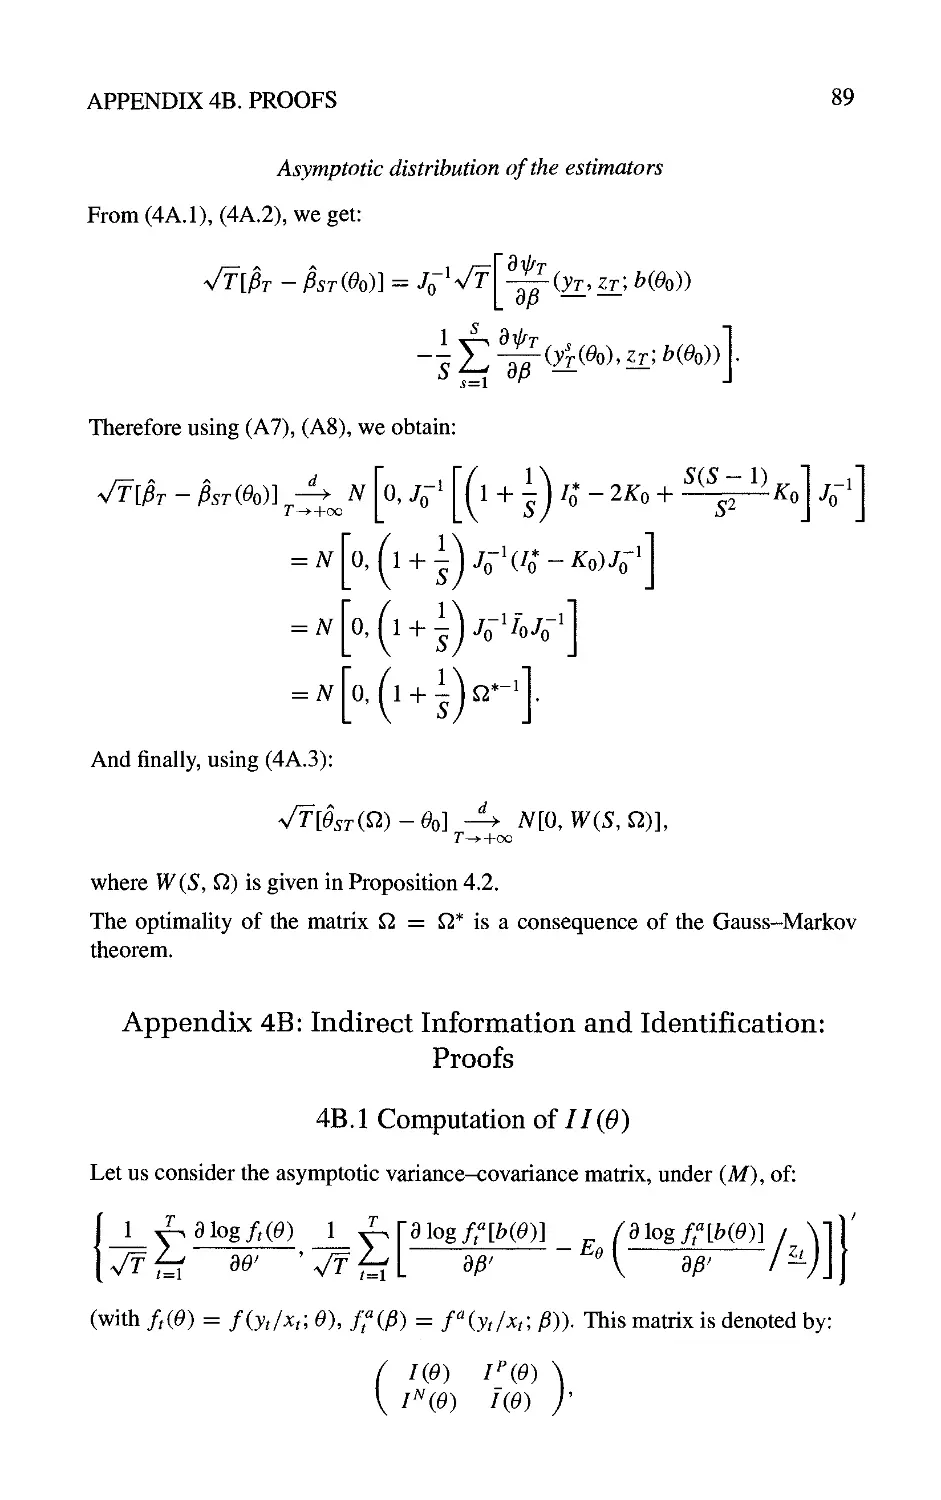 Appendix 4B: Indirect Information and Identification: Proofs